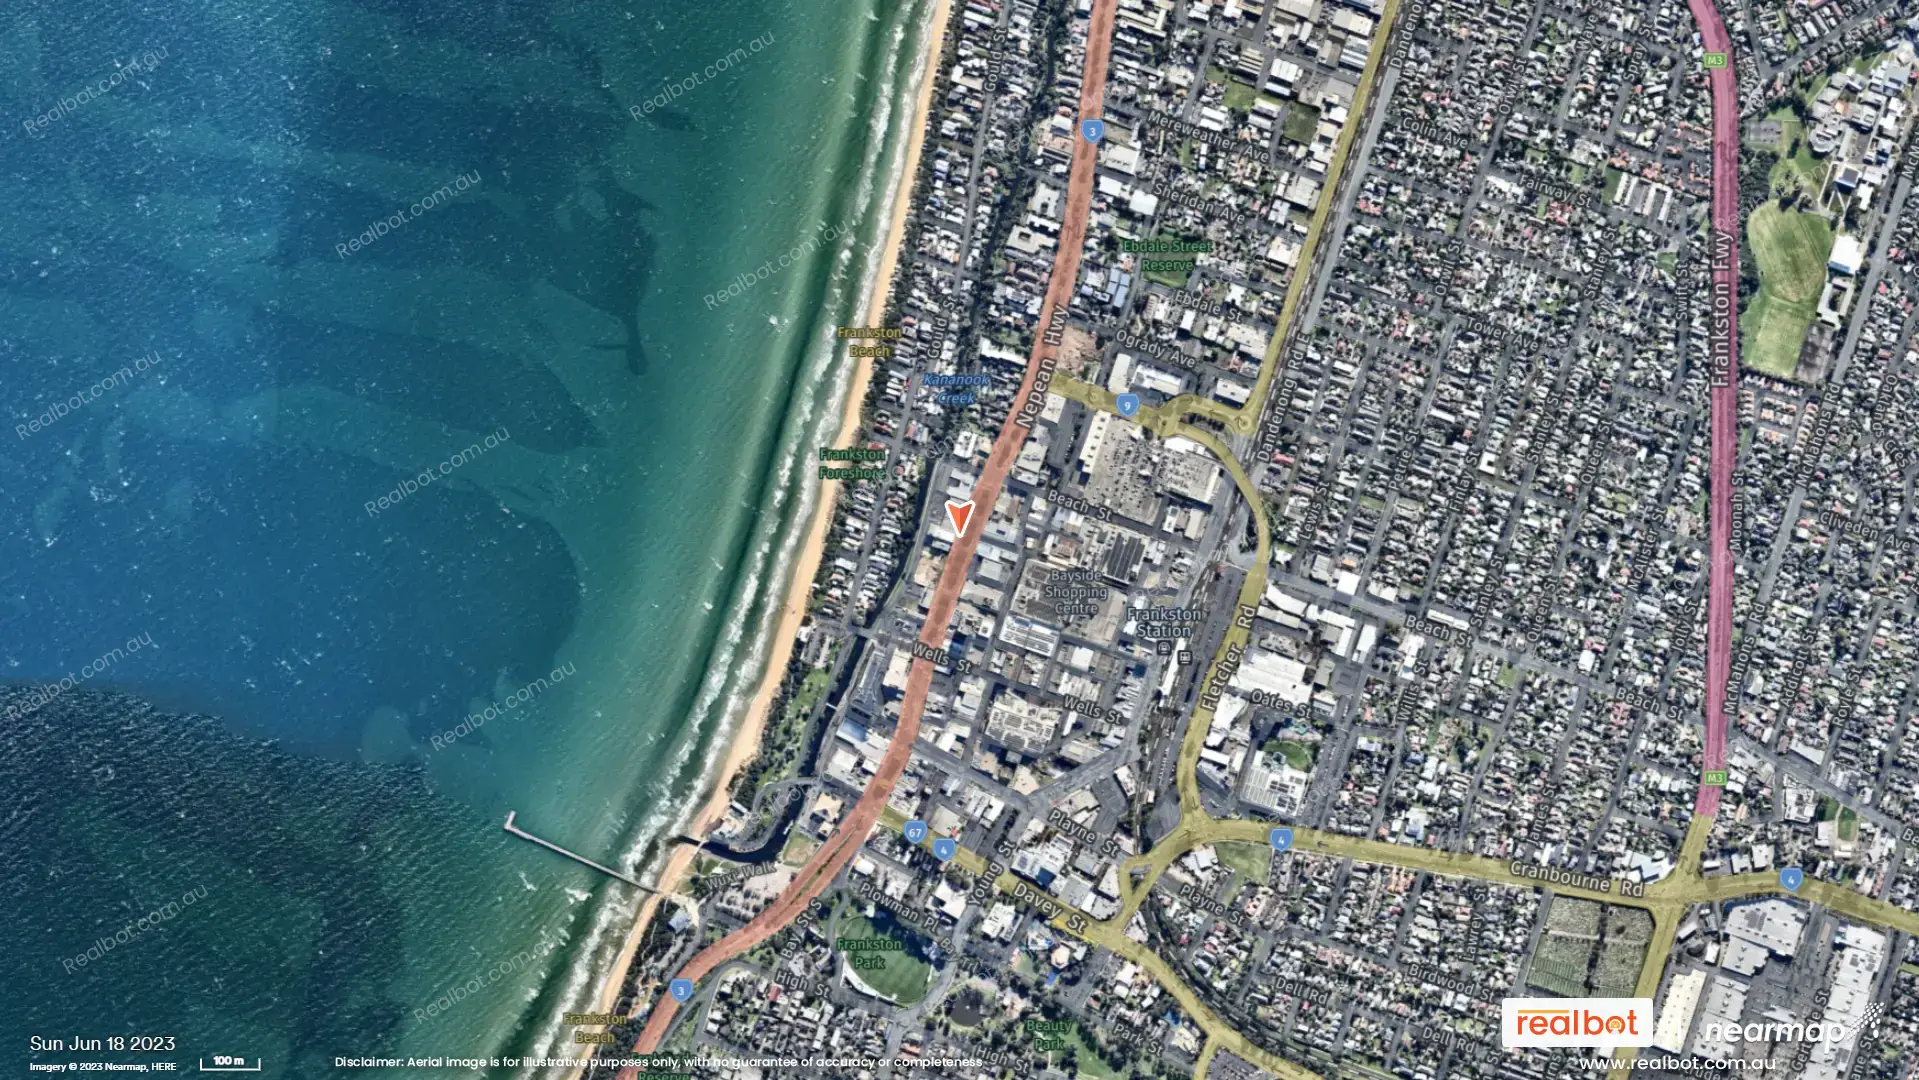 frankston-vic-3199-Aerial-Images-Real-Search